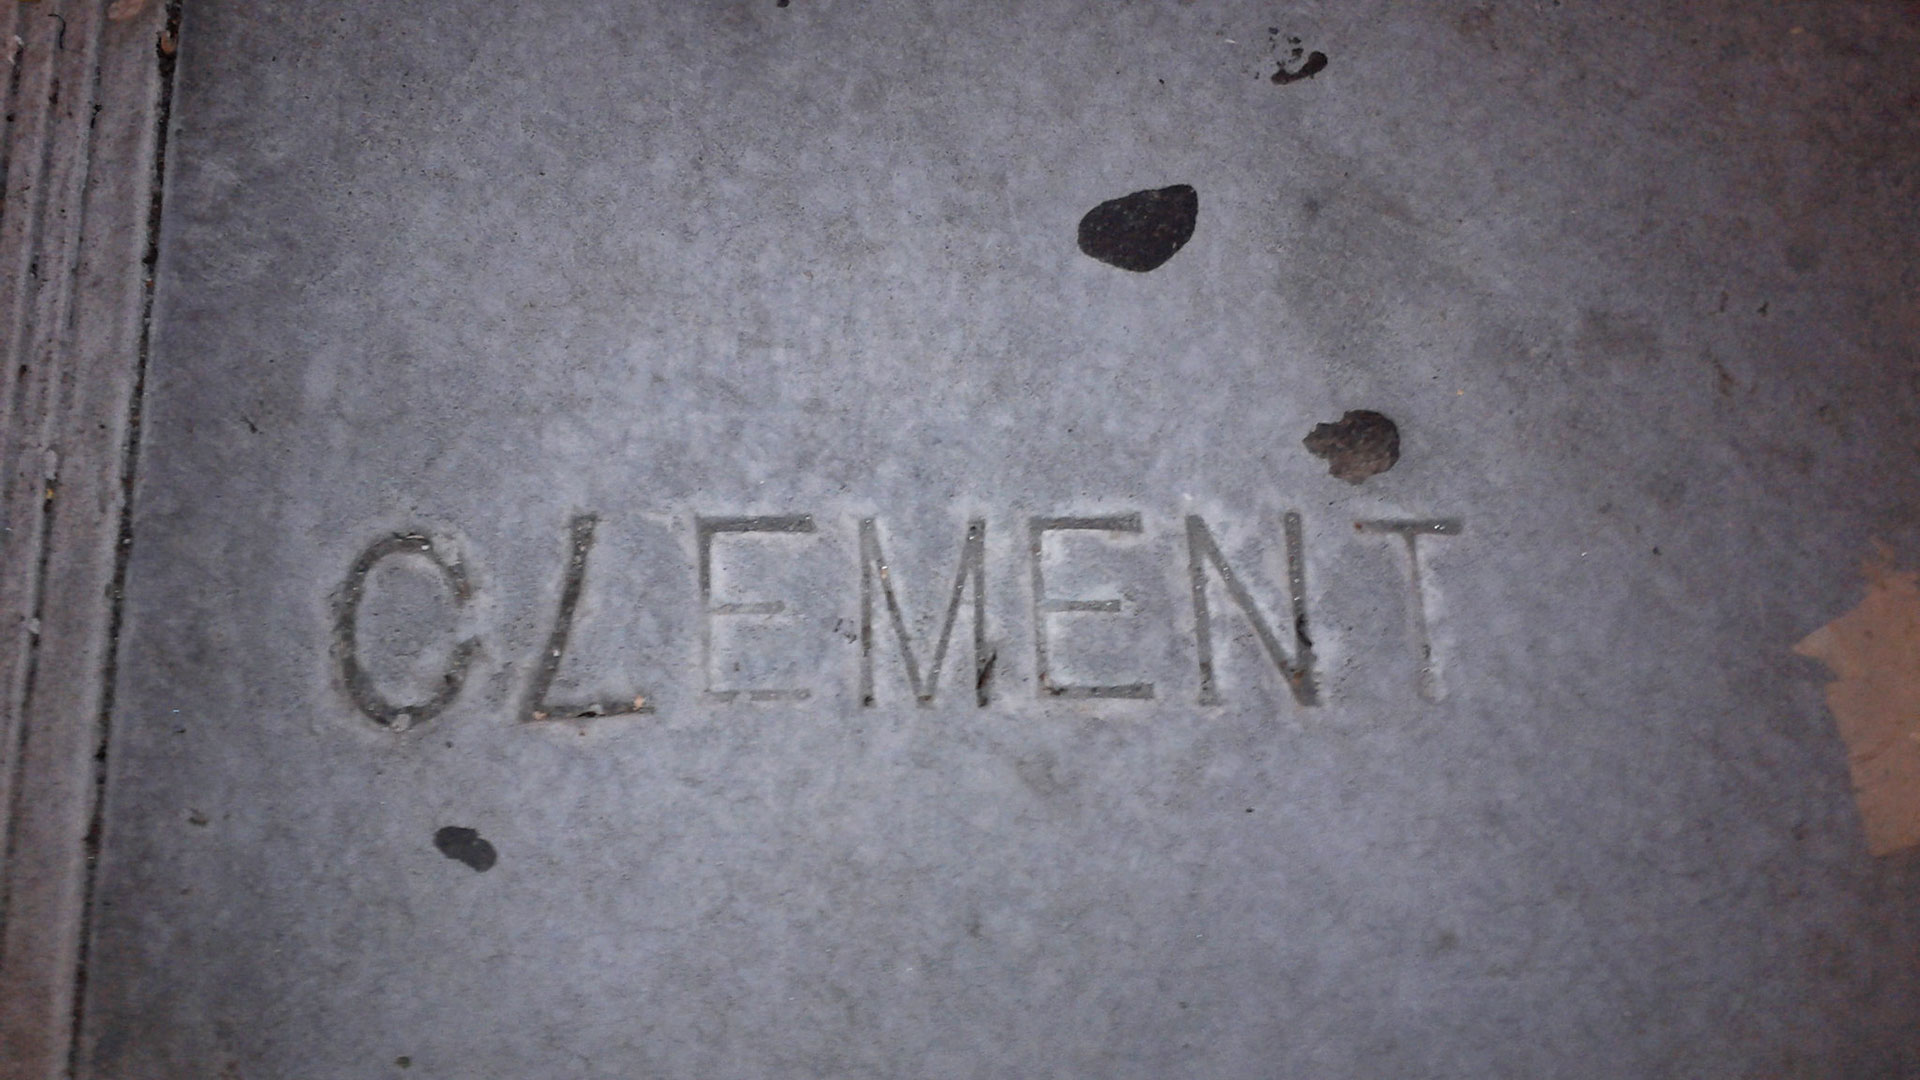 The name Clement is stamped into a sidewalk with an upside down 7 as an L.